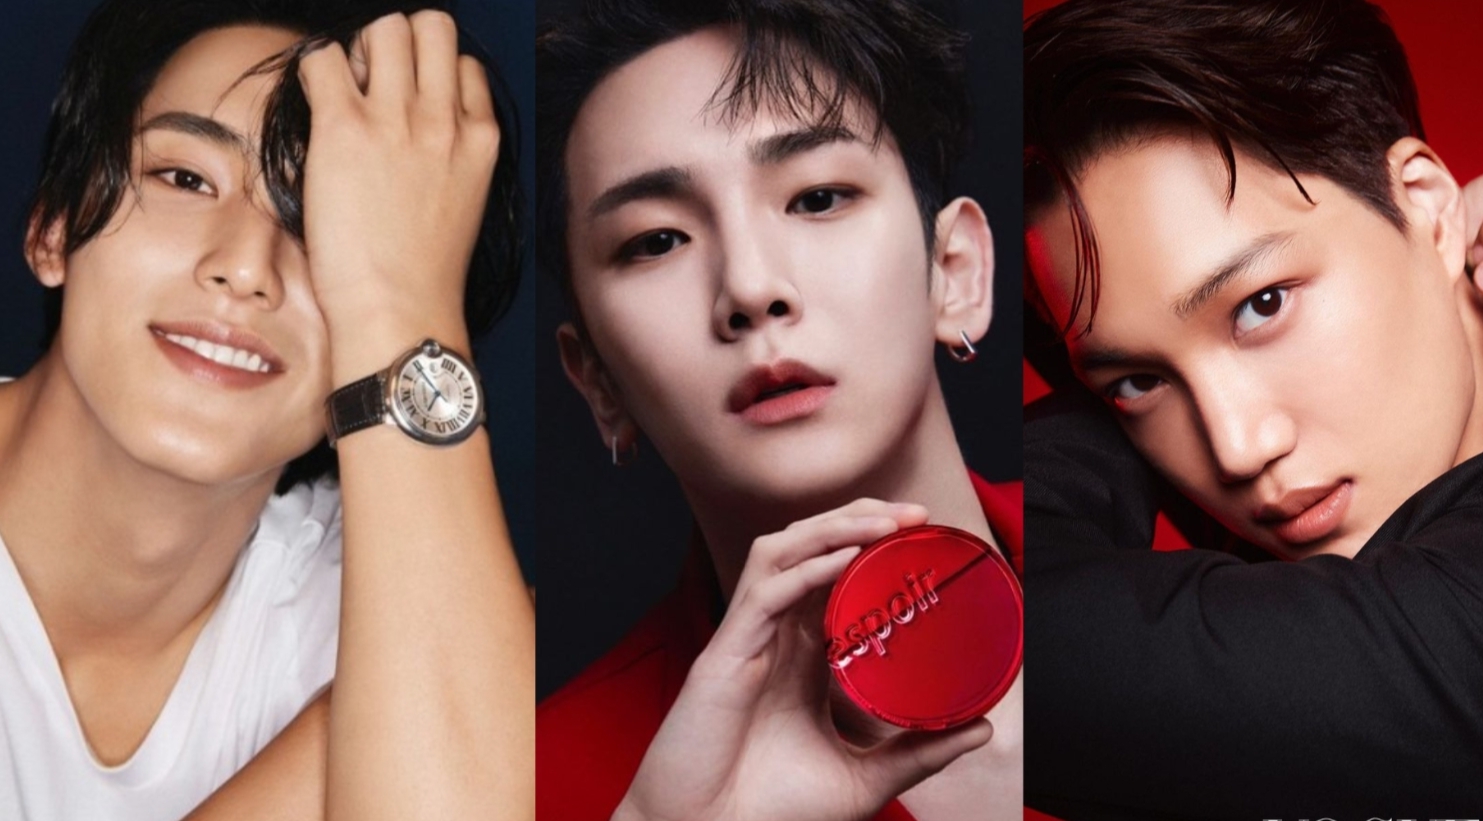 Male idols who broke gender stereotypes and became the faces/models of beauty brands